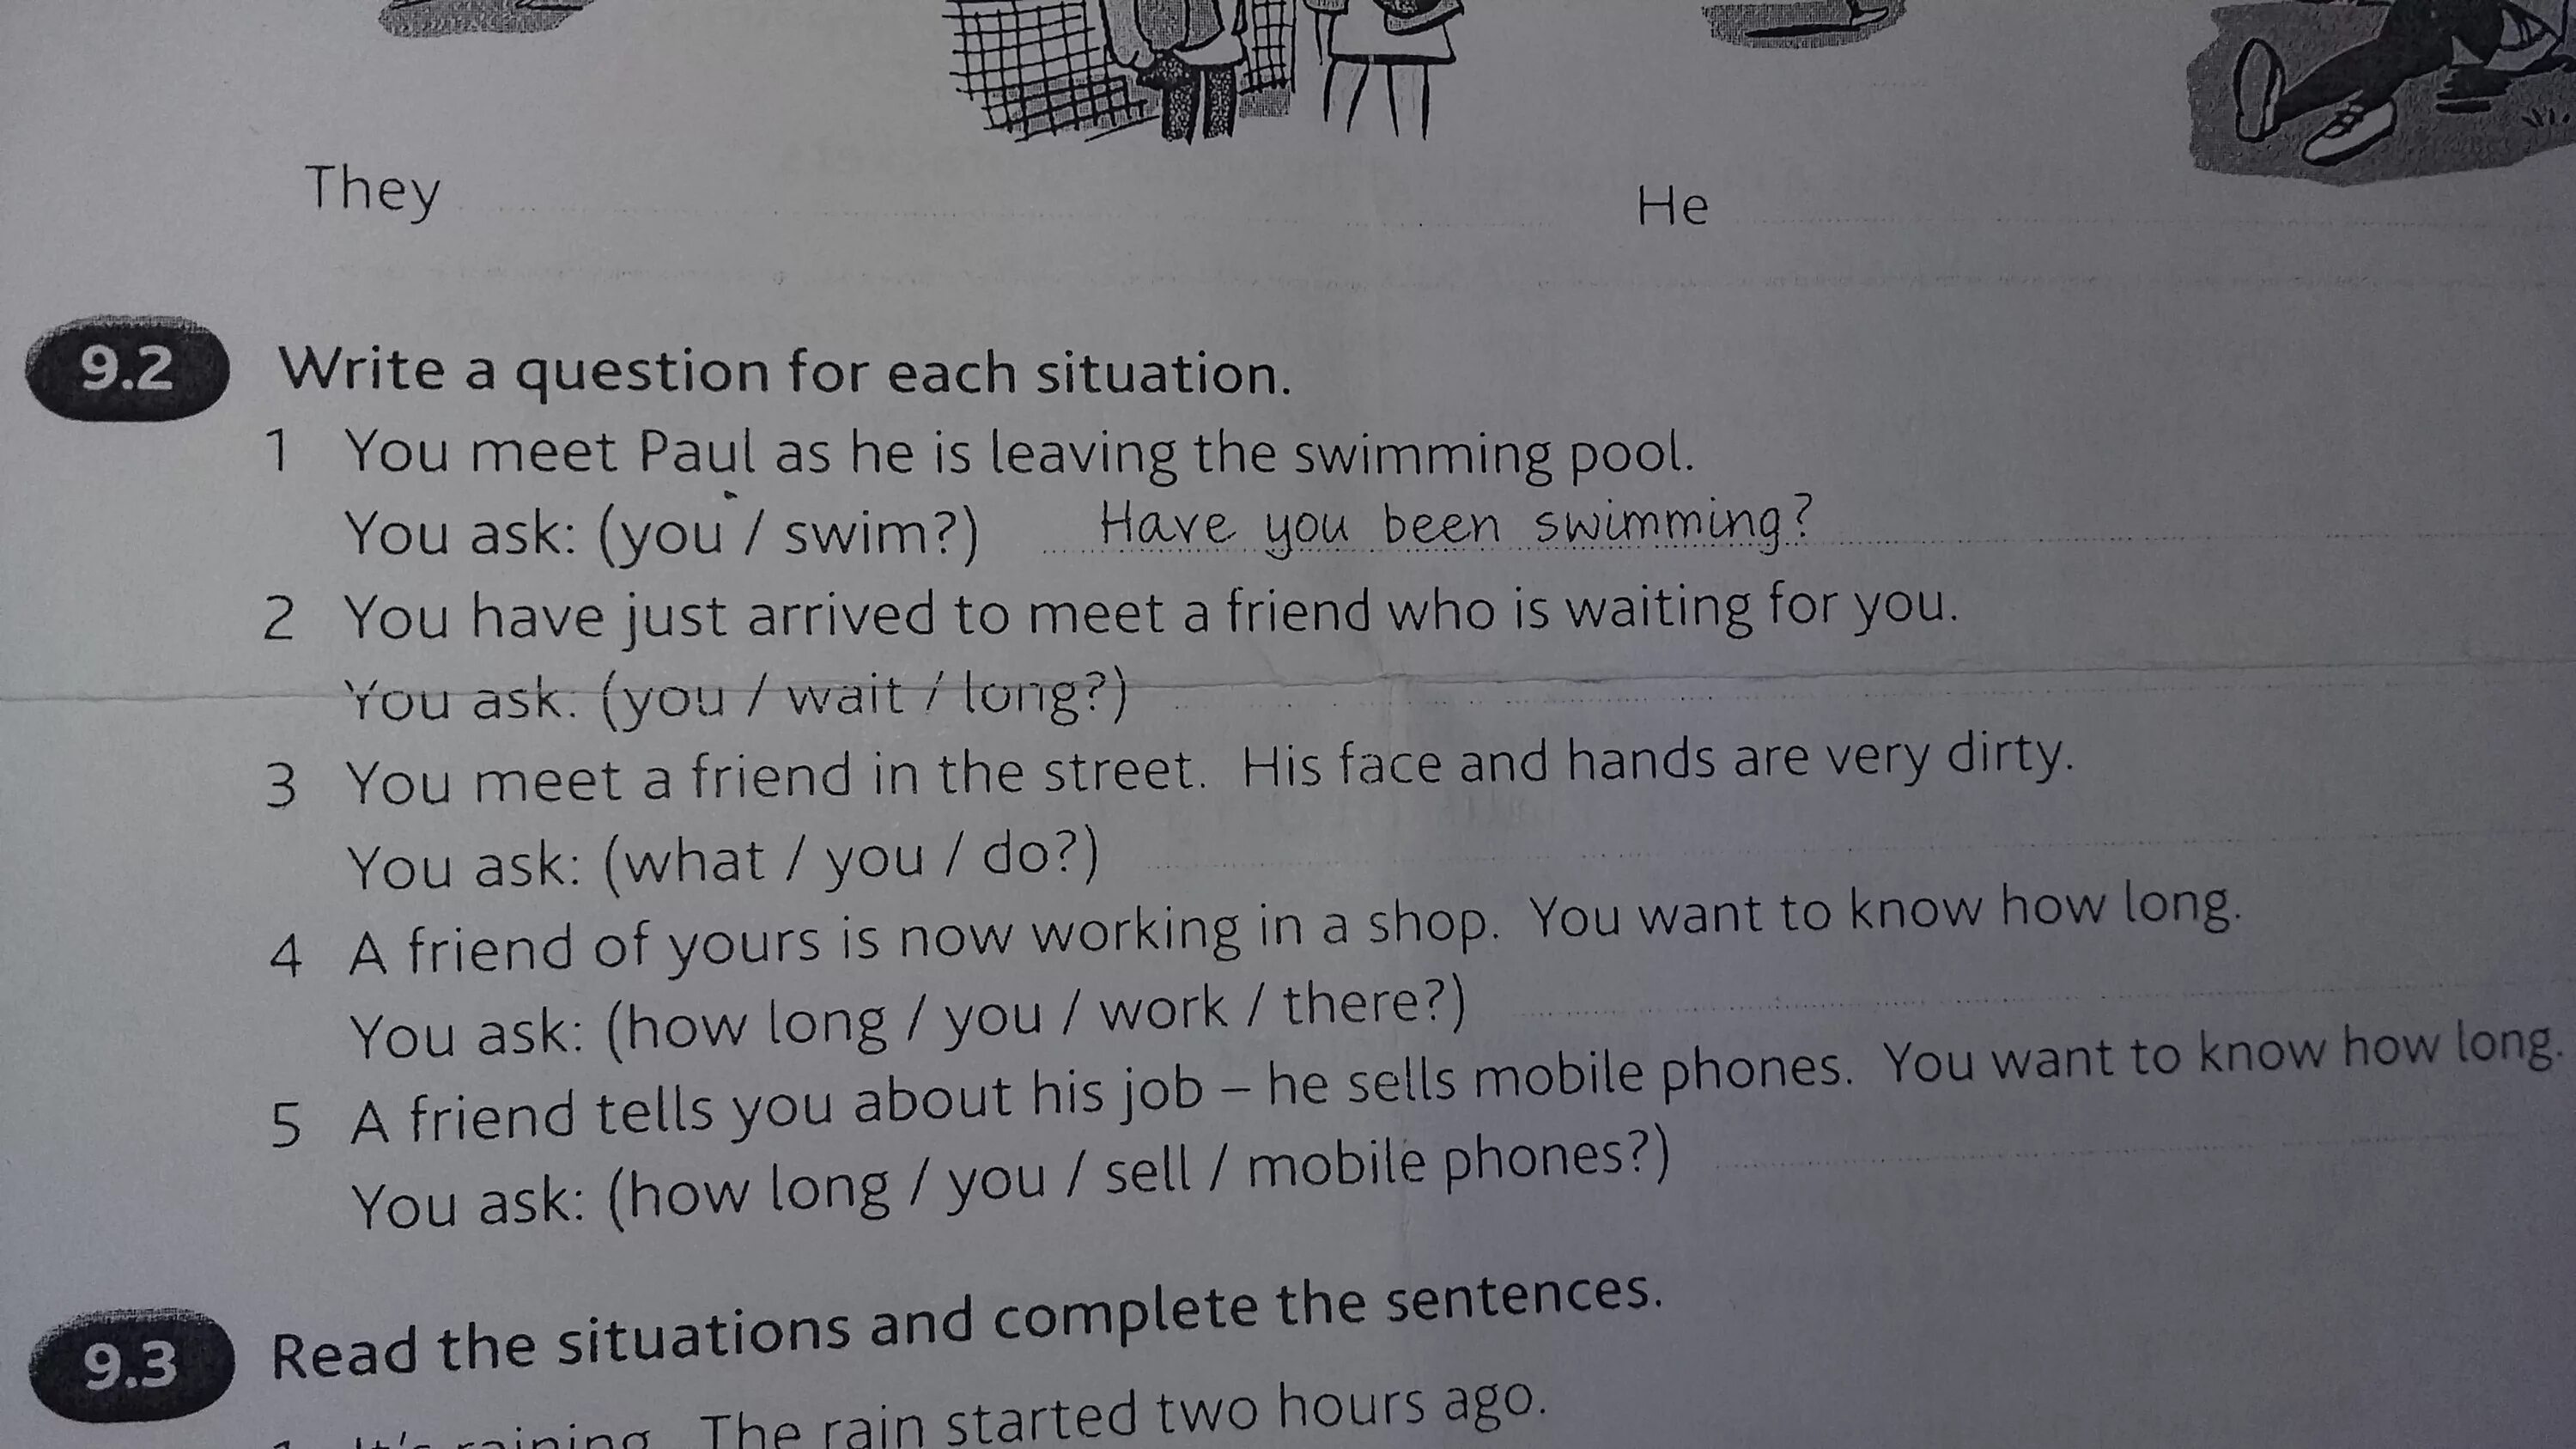 Write a question for each situation 9.2 ответы. Write a question for each situation. Учебник 9.2 written a question for each situation стр 19 ответы. Write a question with going to for each situation you meet Paul as he is.